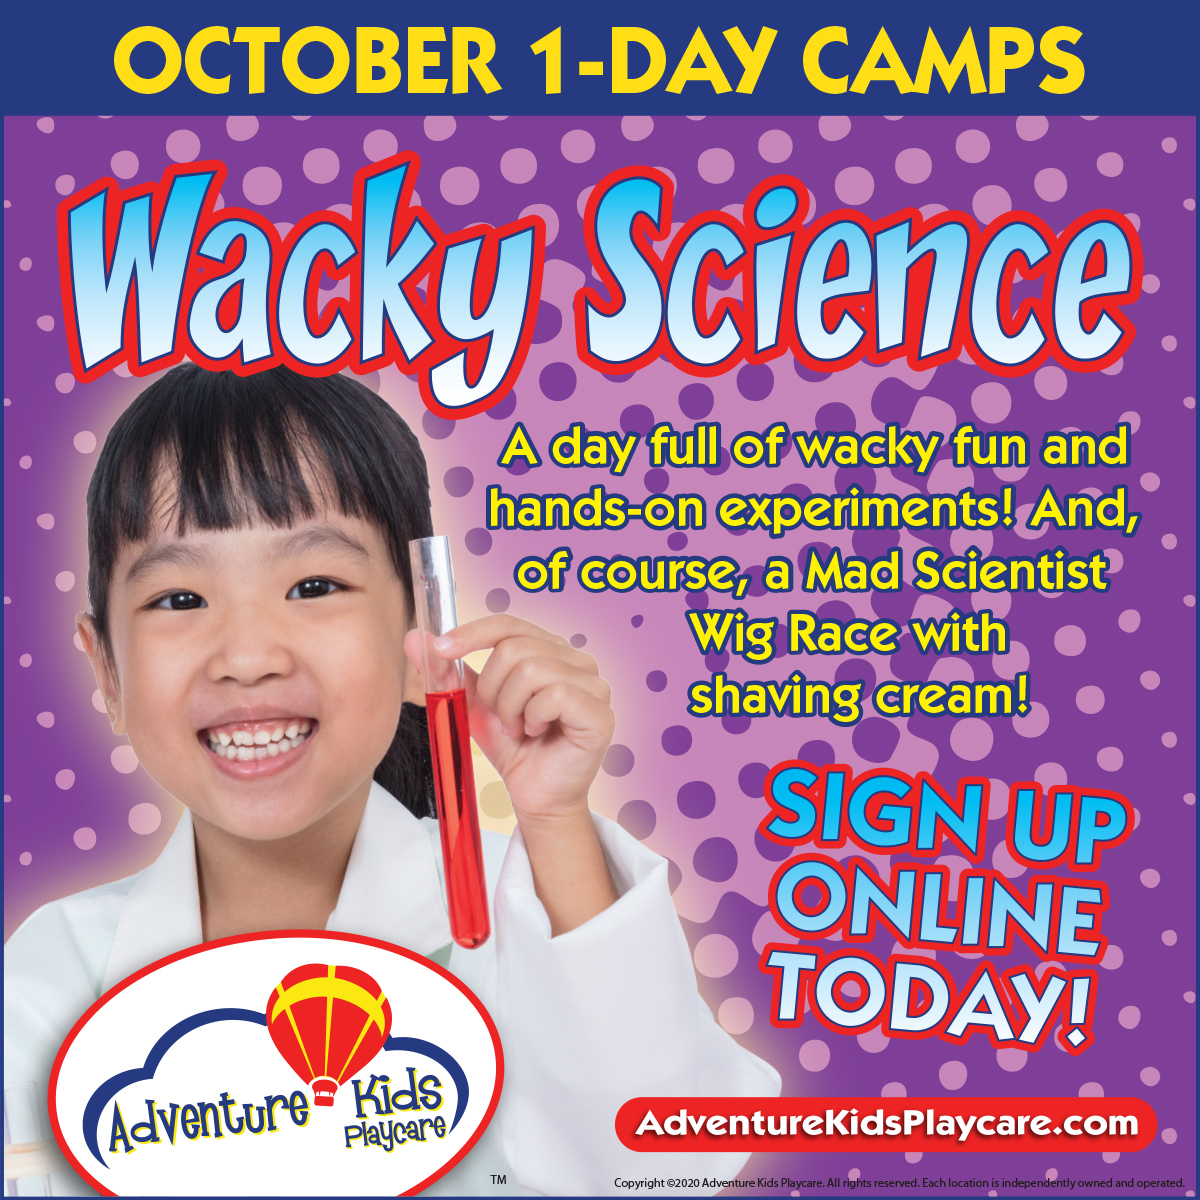 Akp october camps wacky science fb 1200x1200